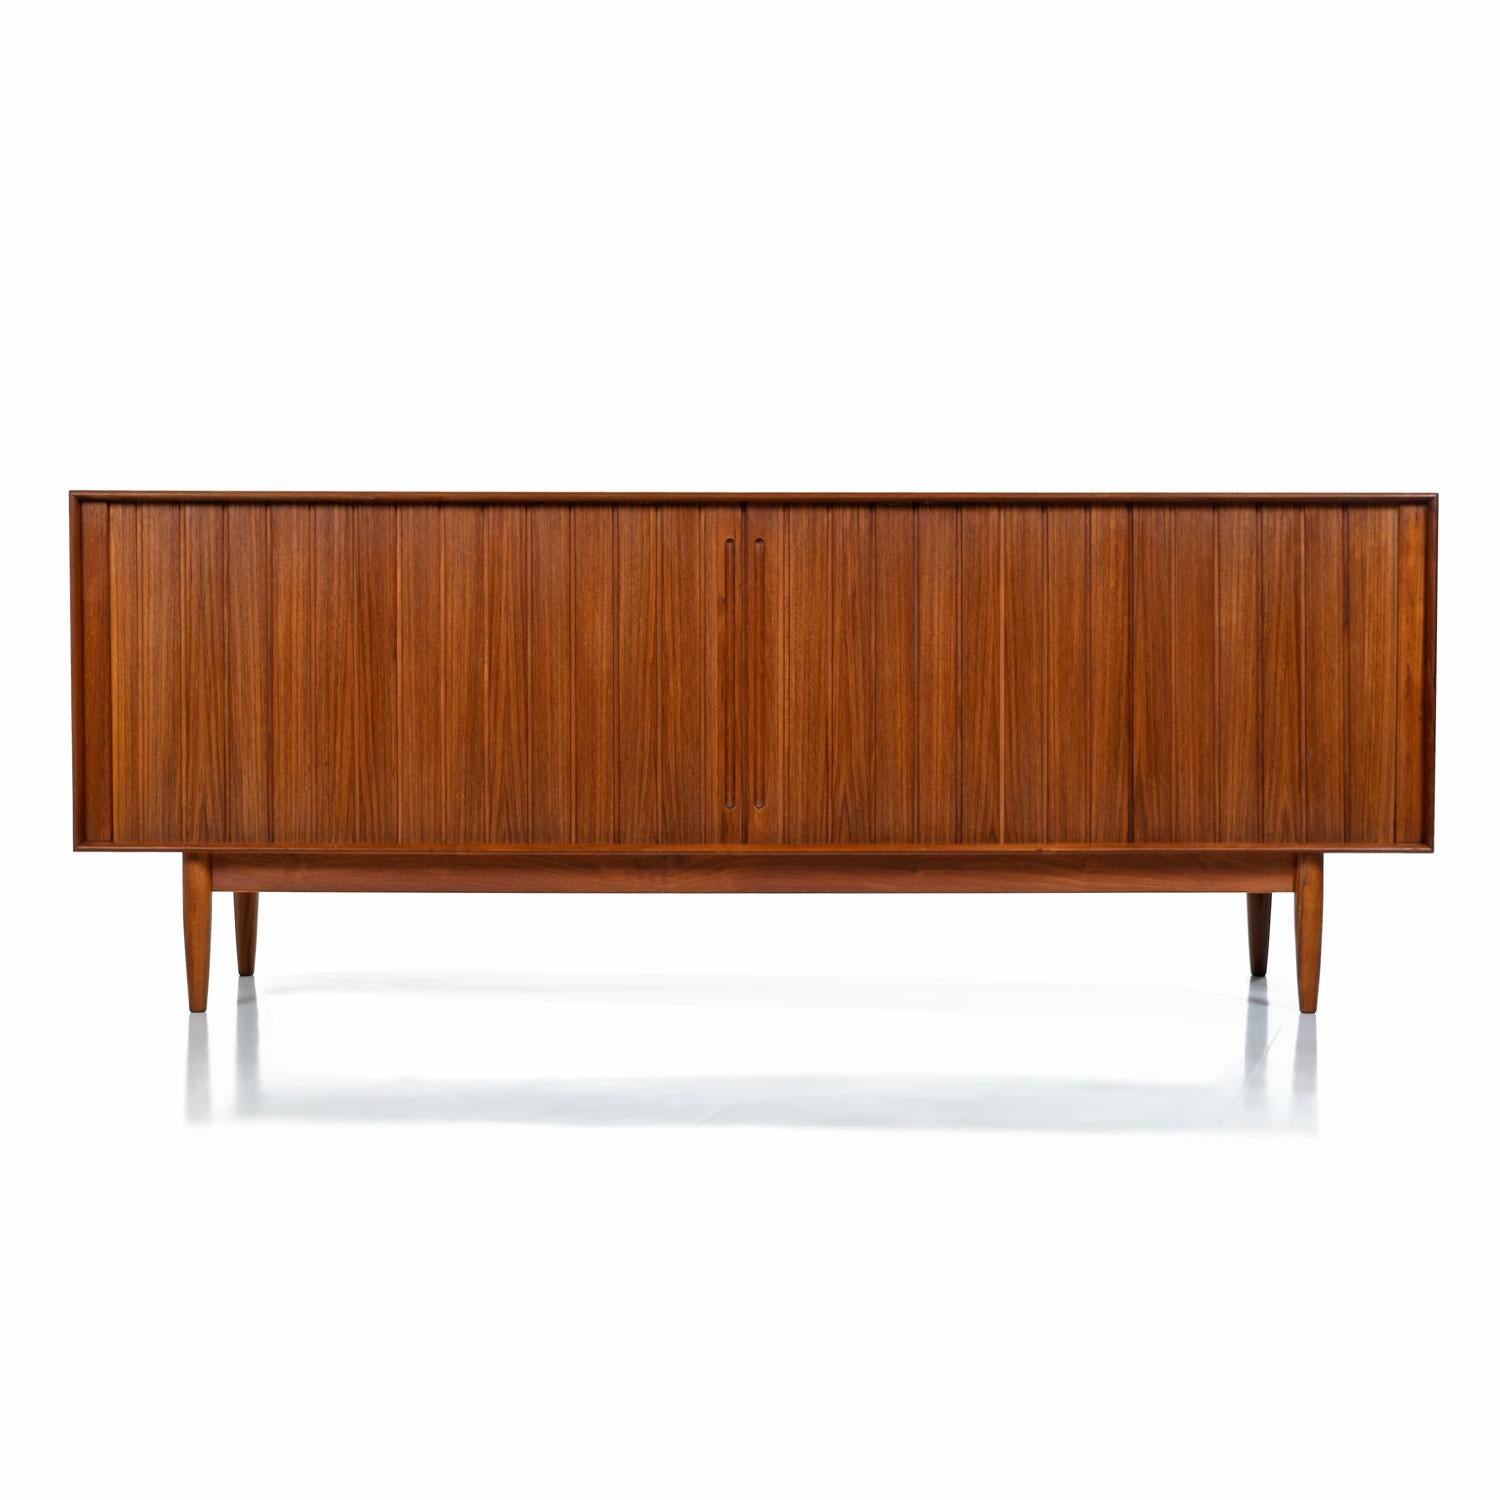 Mid-Century Modern Johannes Aasbjerg solid teak sideboard credenza. Made from 100% solid teak (except for the interior shelves), this sideboard is a perfect marriage of design and function, featuring exquisite craftsmanship, a finished back and lots